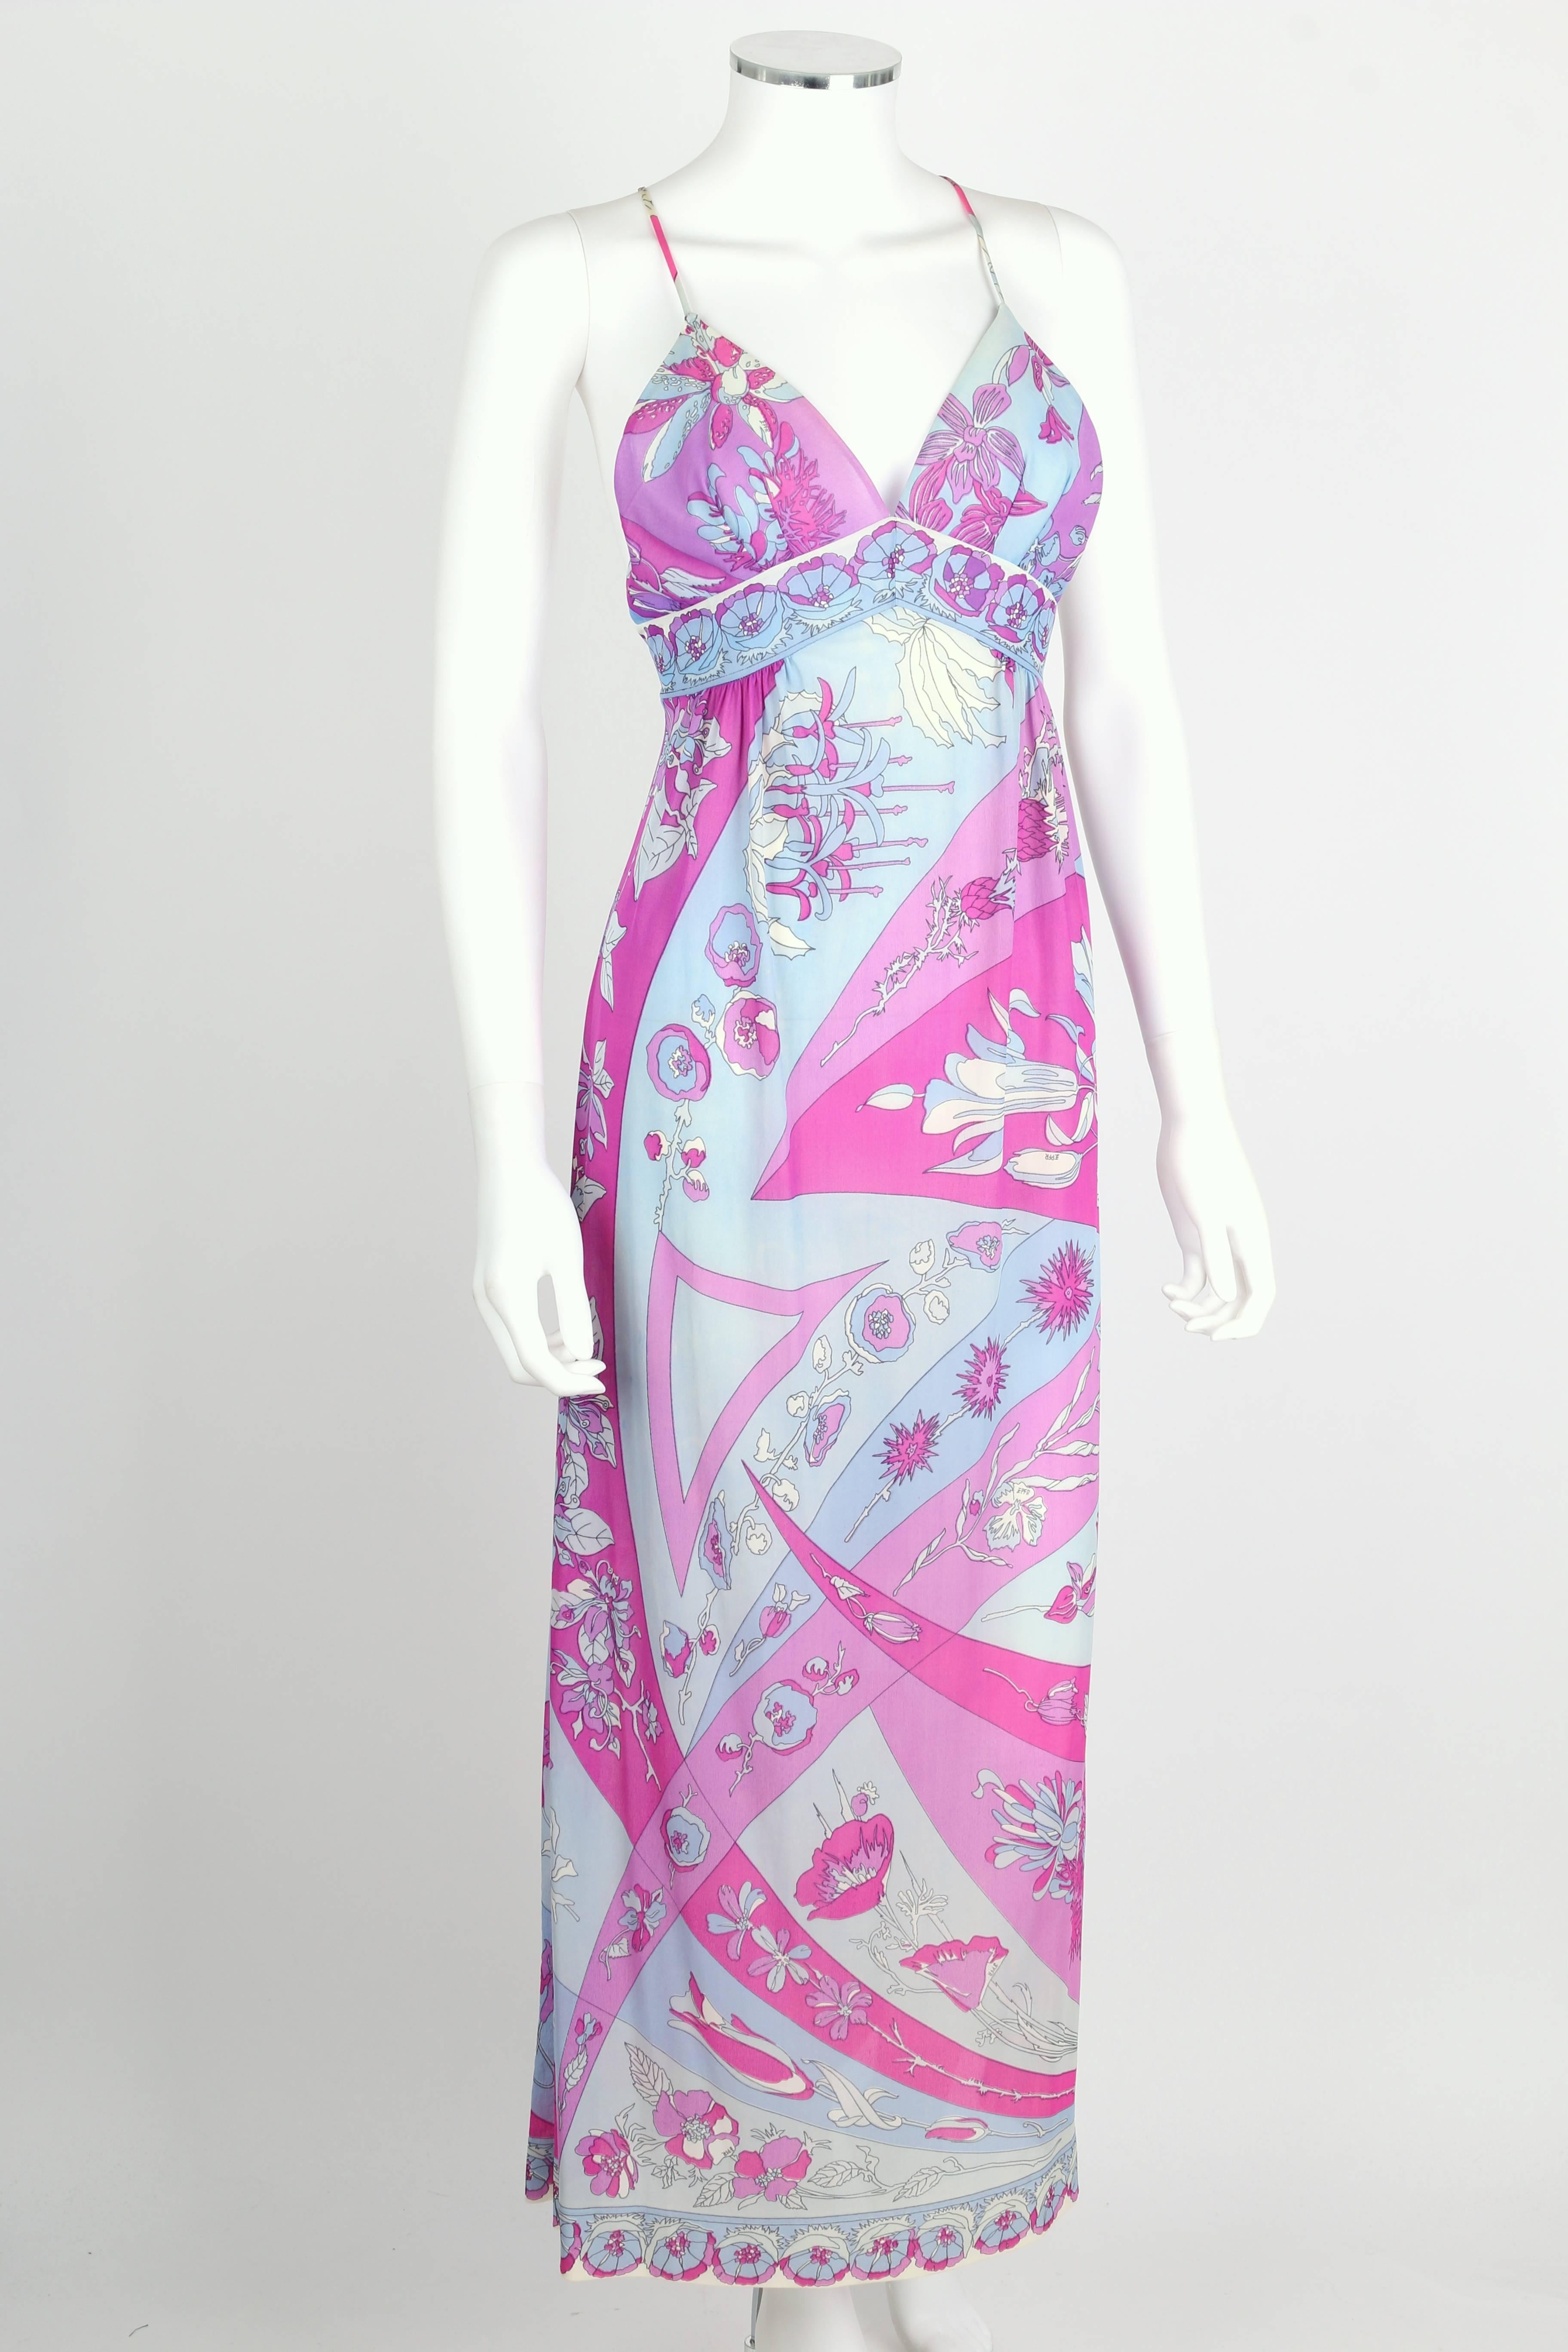 Vintage c.1970's Emilio Pucci for Formfit Rogers floral print long slip maxi dress in shades of pale blue, purple and magenta. Spaghetti straps. Low scoop back with cross strap detailing. Empire waistline. Deep v-neckline. Decorative floral border